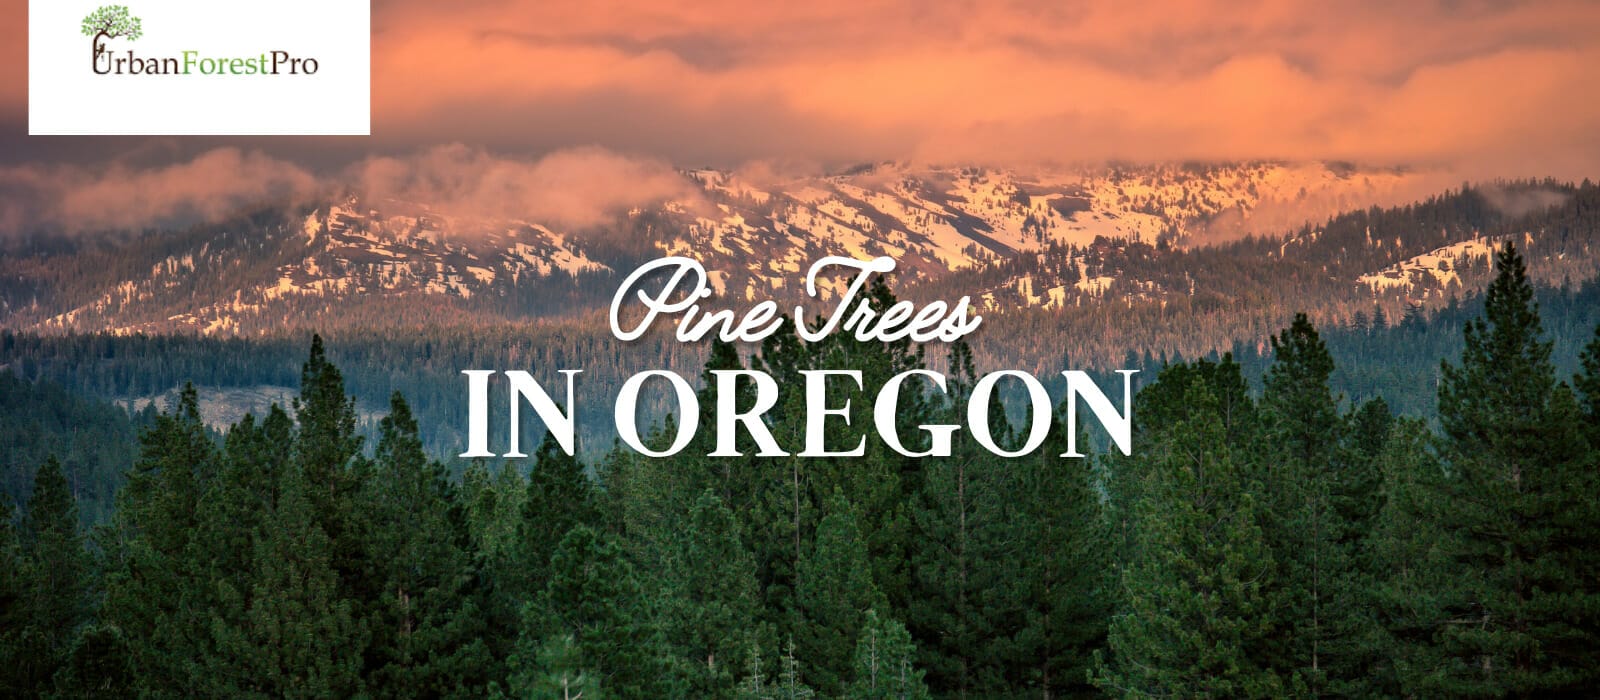 Oregon Pine Tree Identification - Find Out About Types Of Pine Trees Near  You in Oregon - Urban Forest Pro